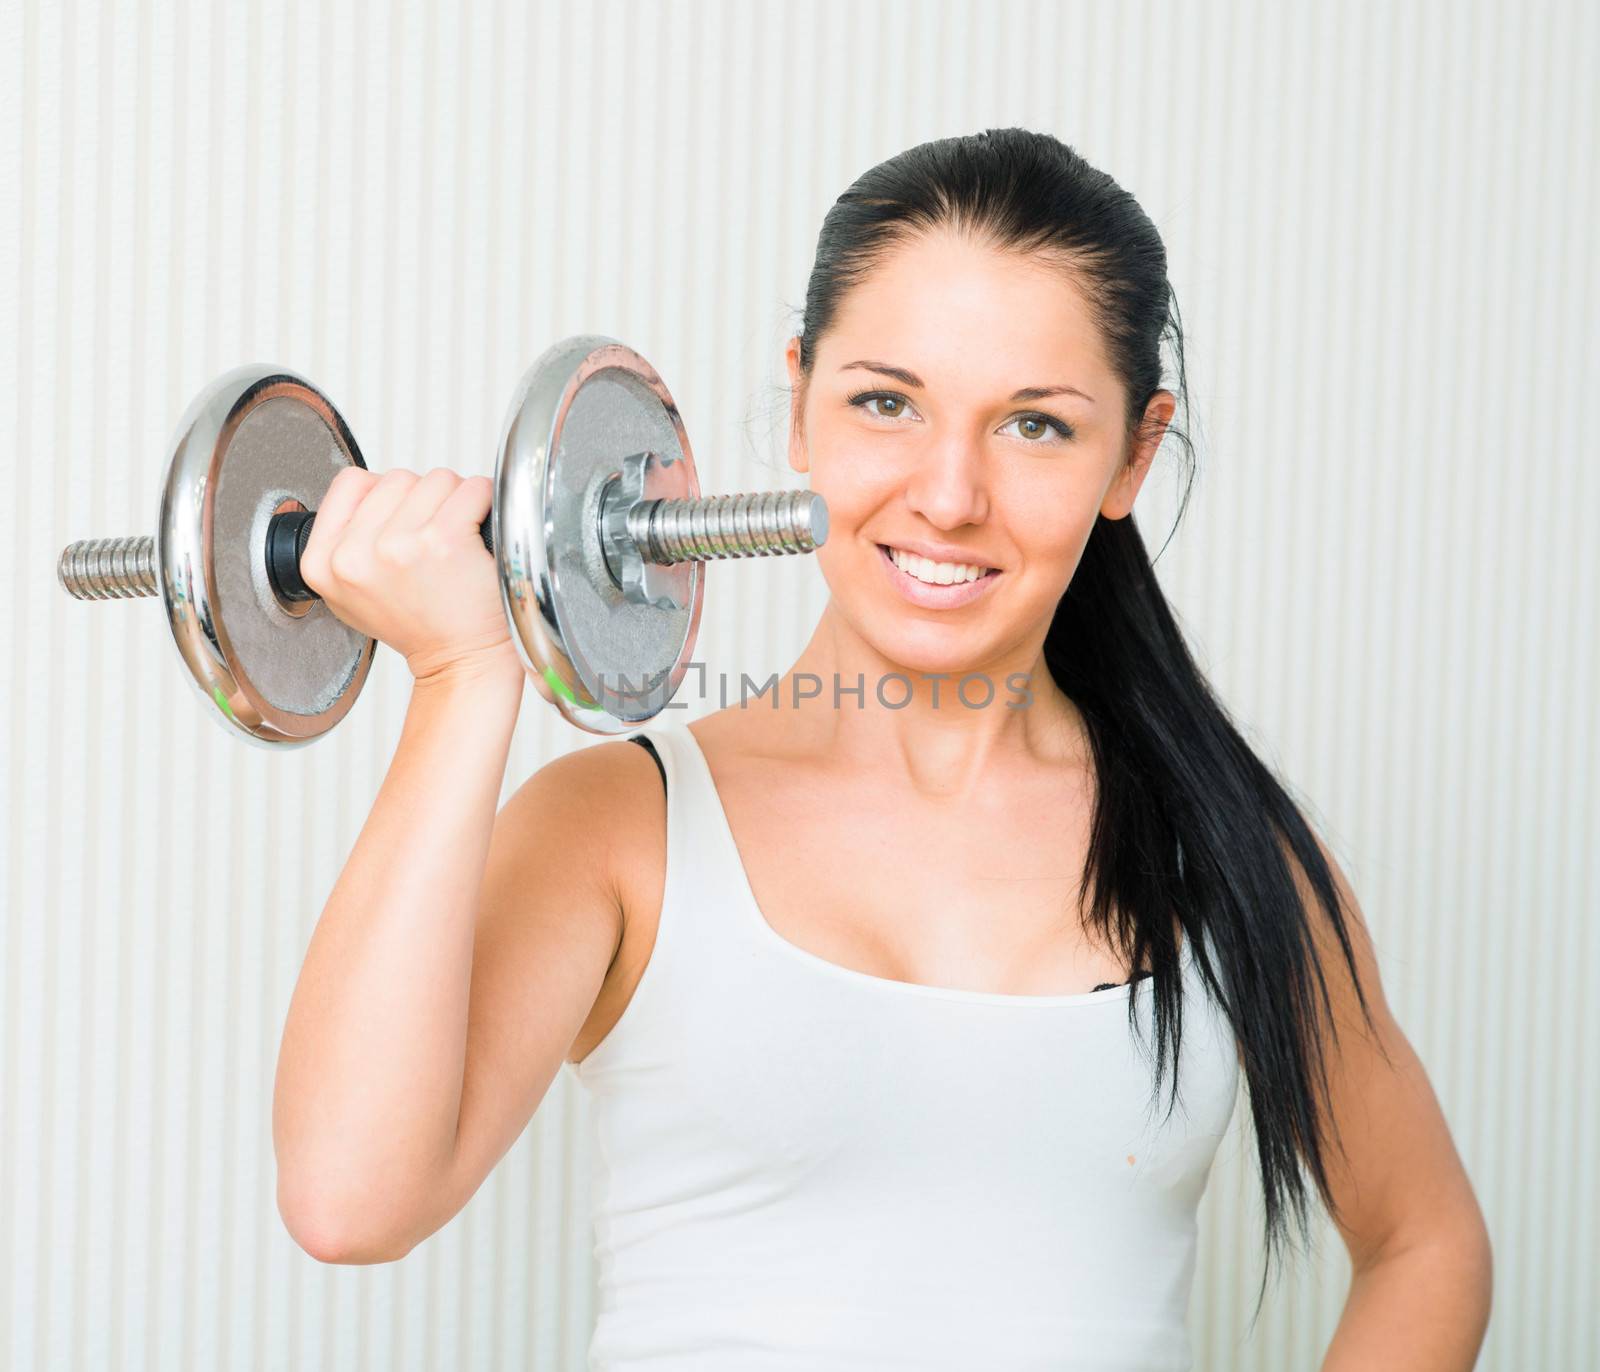 fitness woman working out with dumbbell